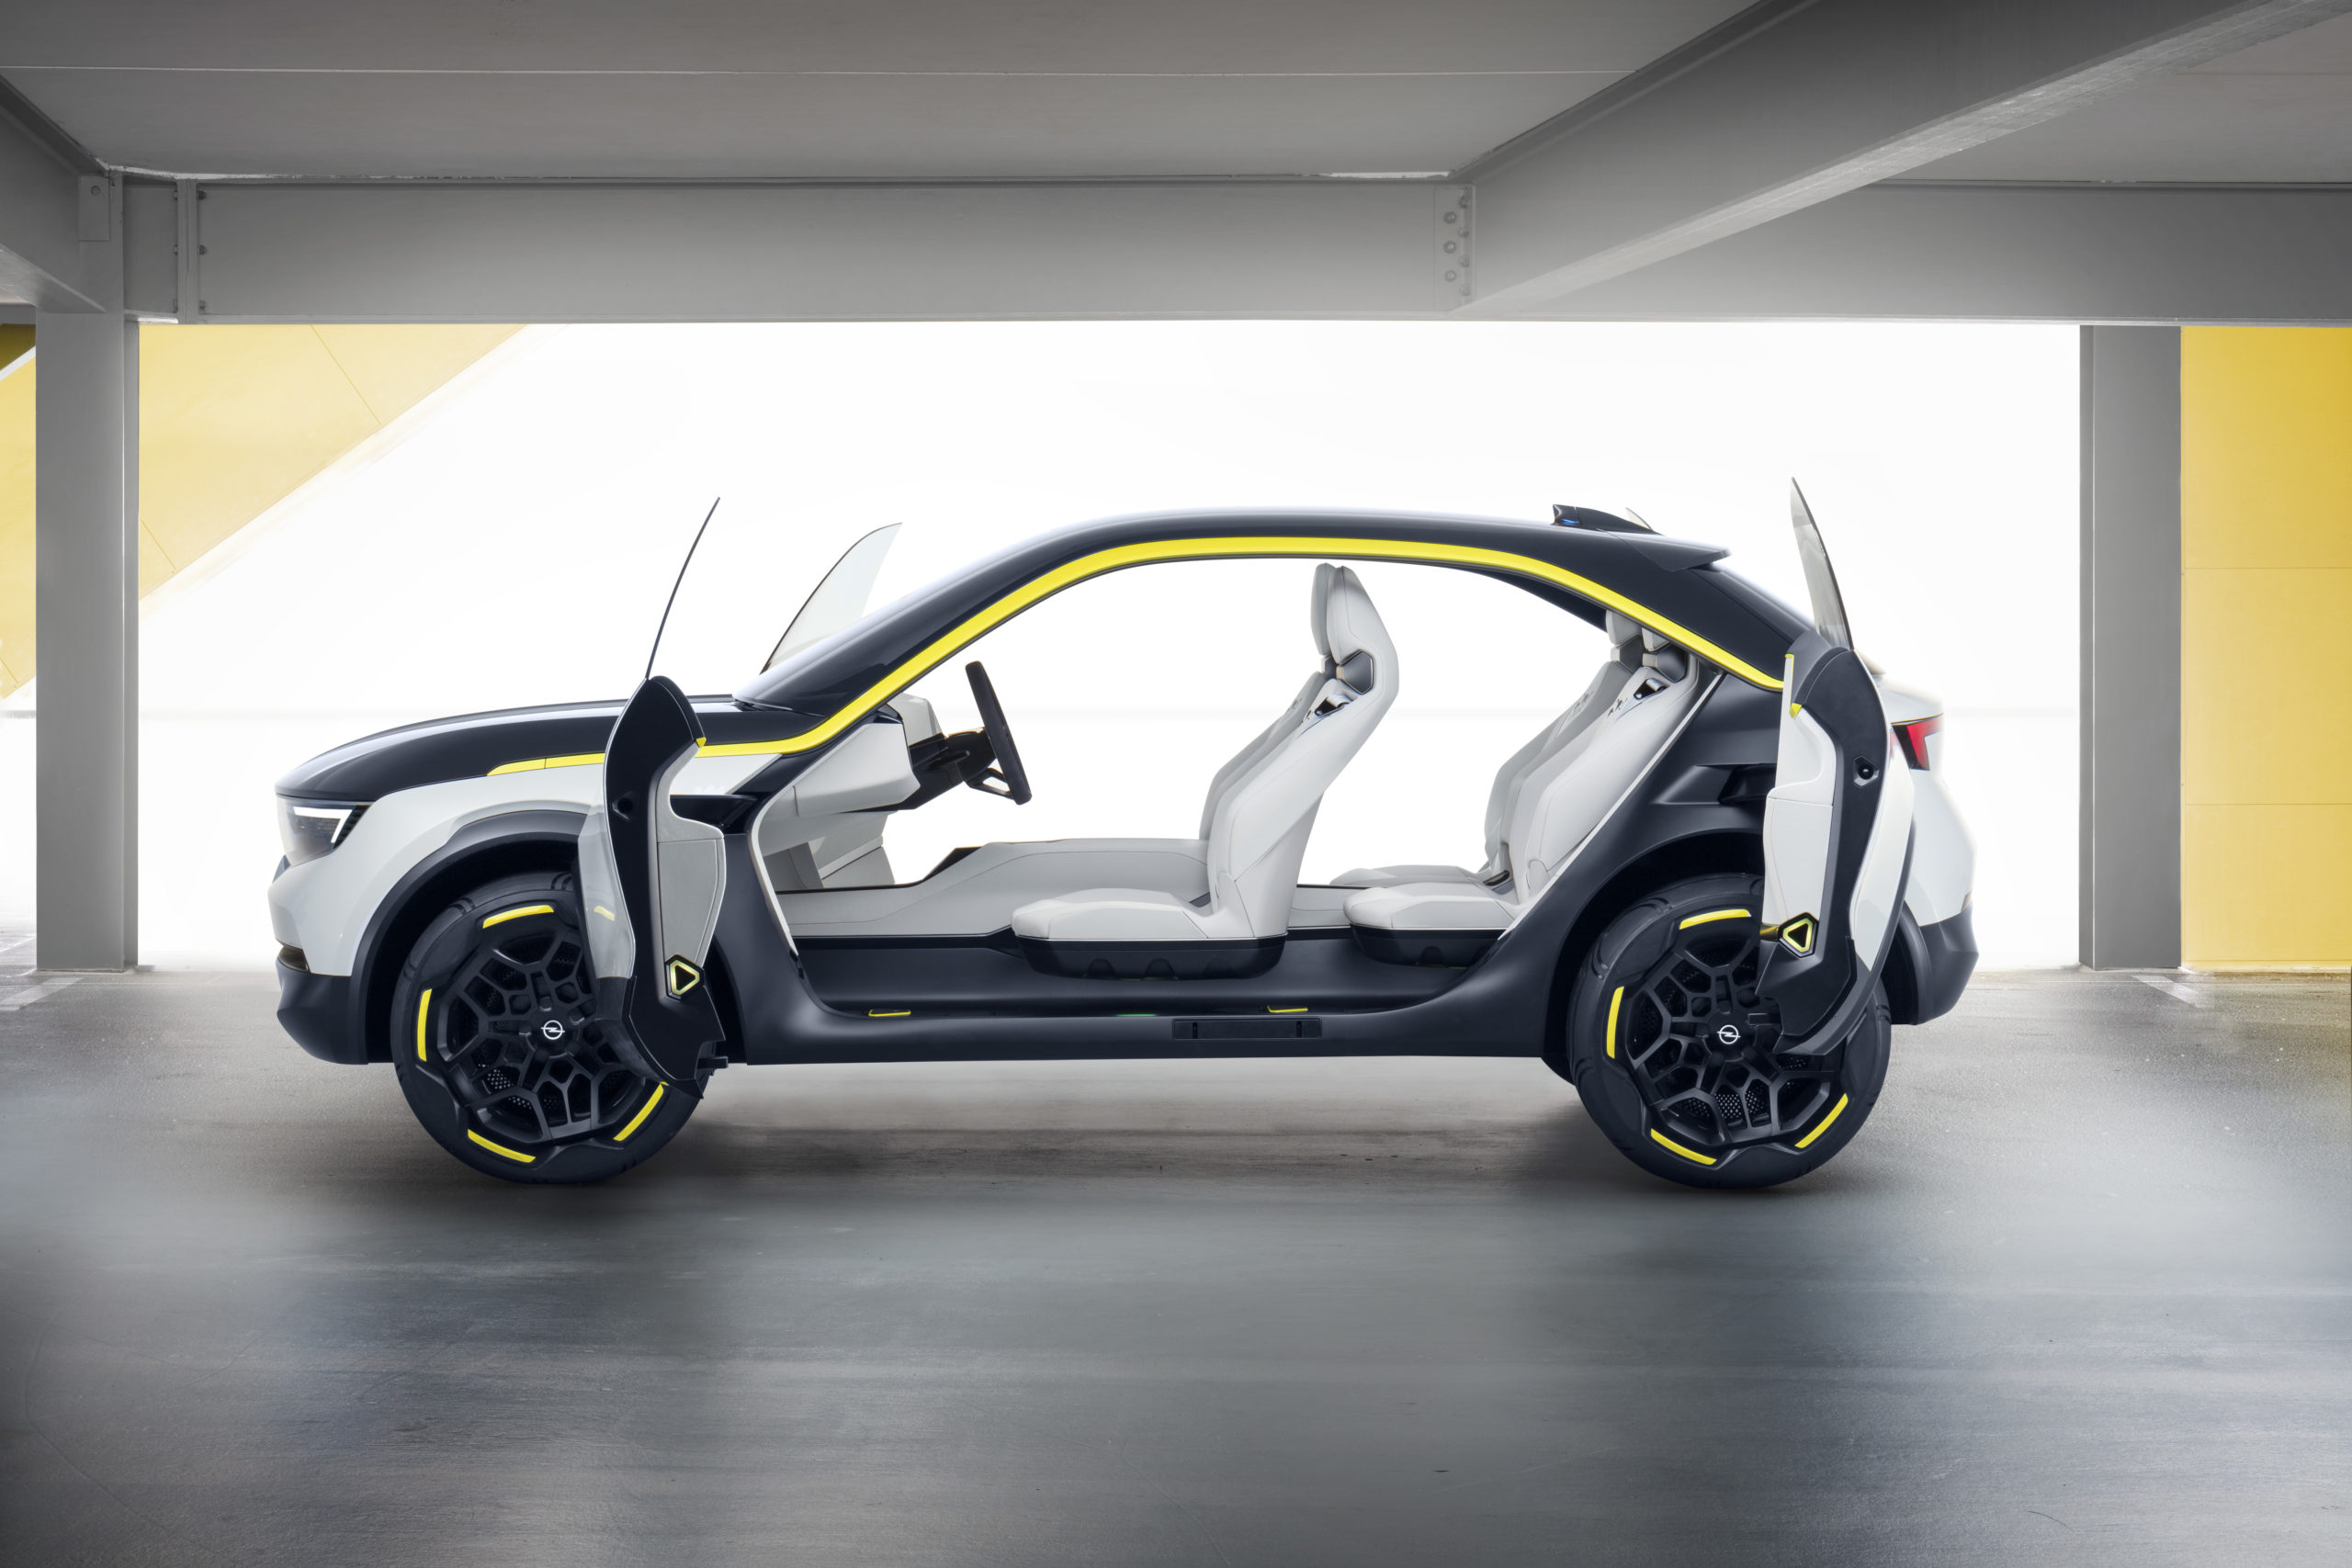 Opel is almost halving its design department